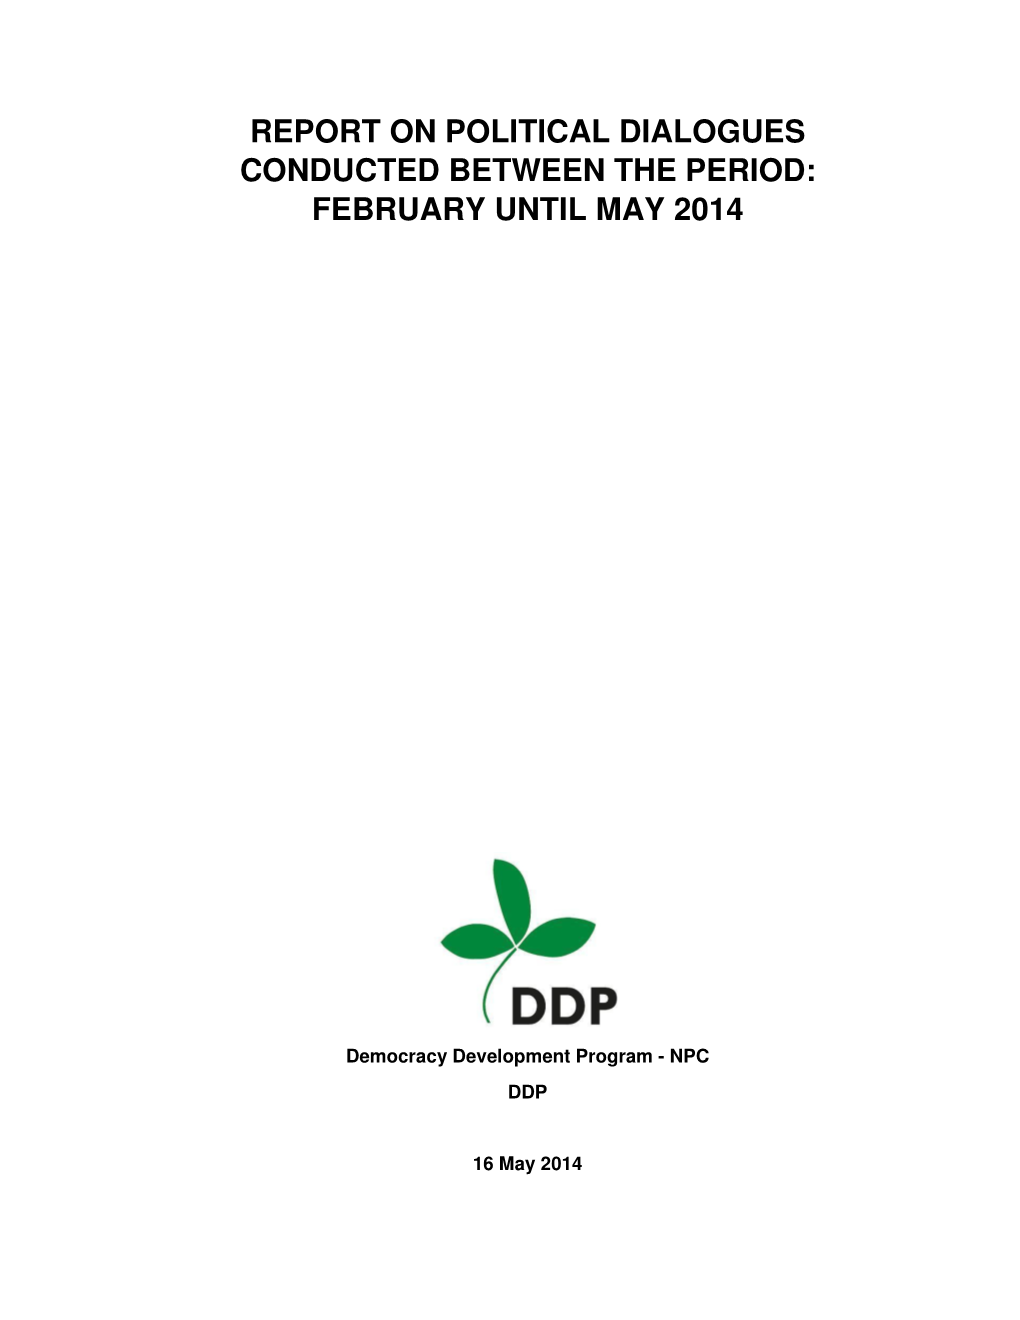 Report on Political Dialogues Conducted Between the Period: February Until May 2014